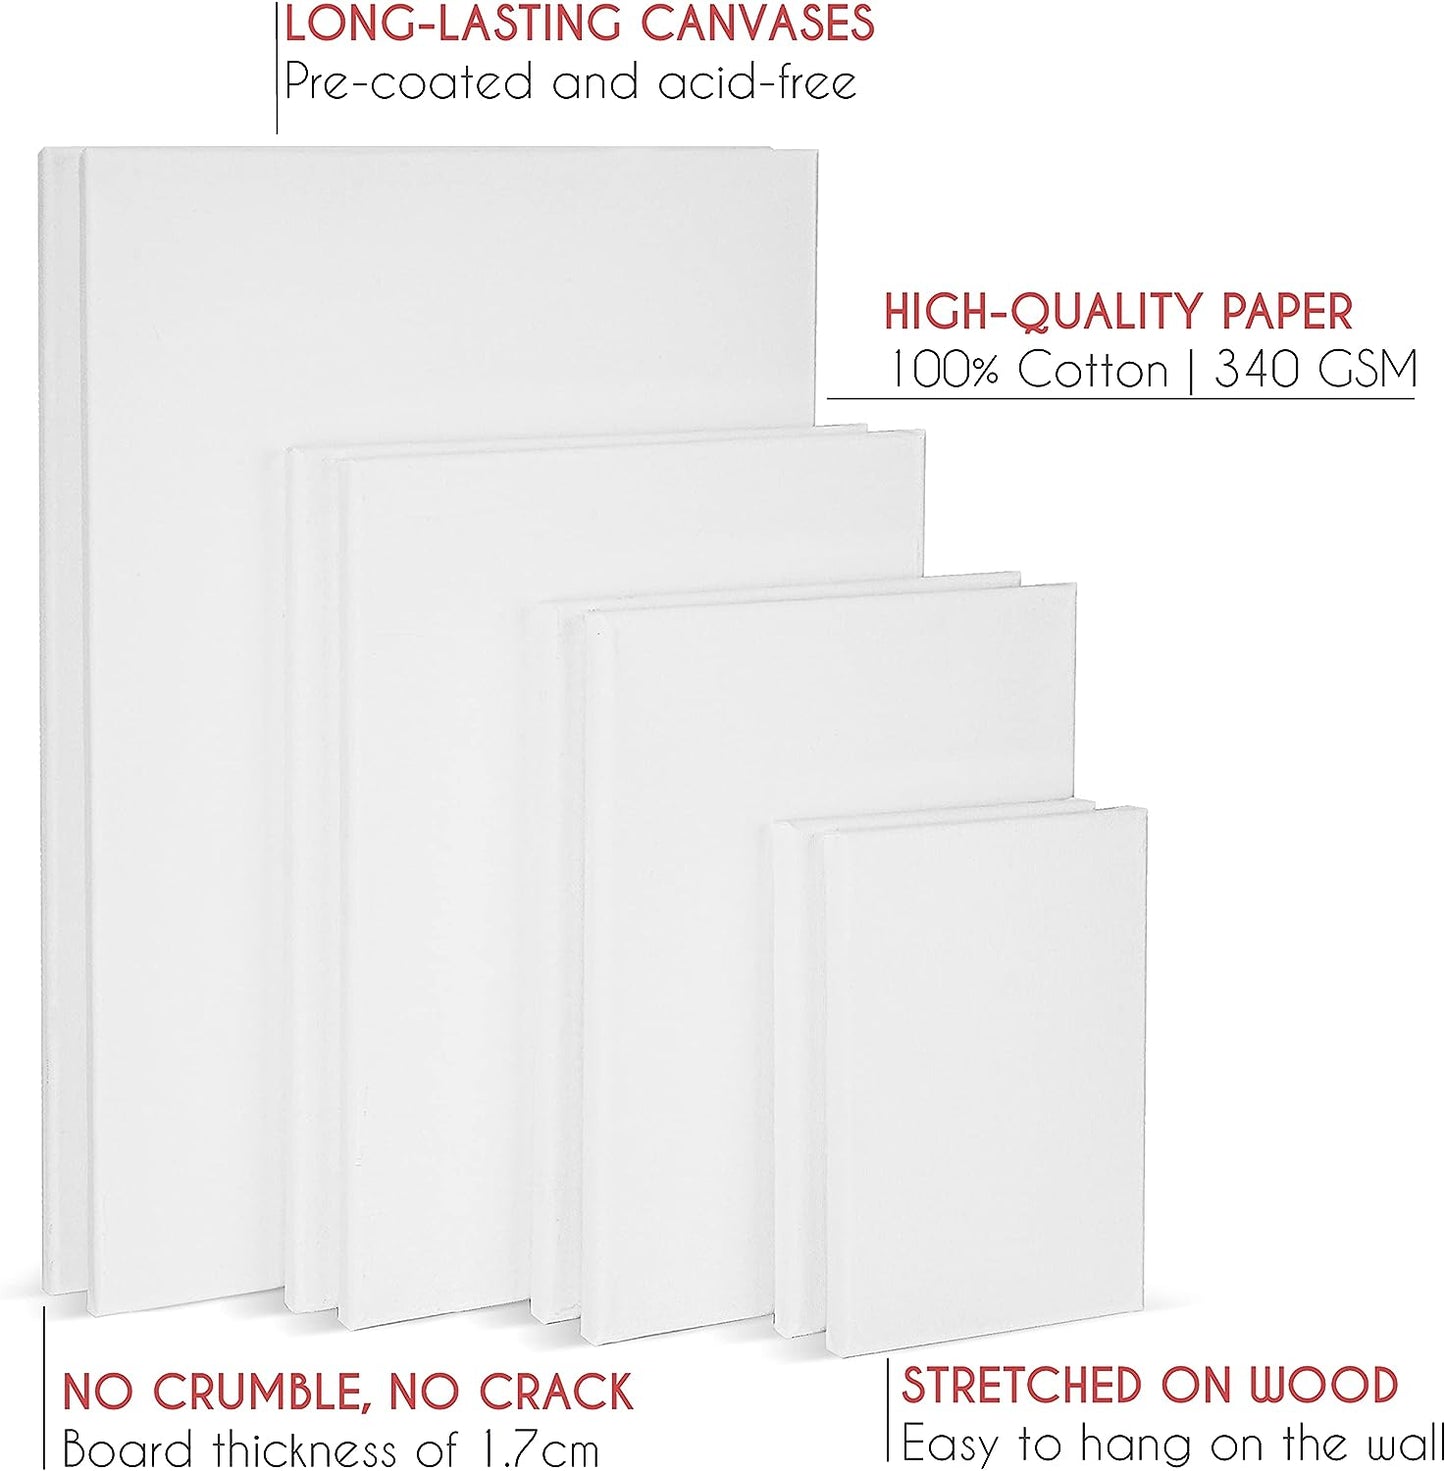 8 Canvases to Paint with Multi-size Frame